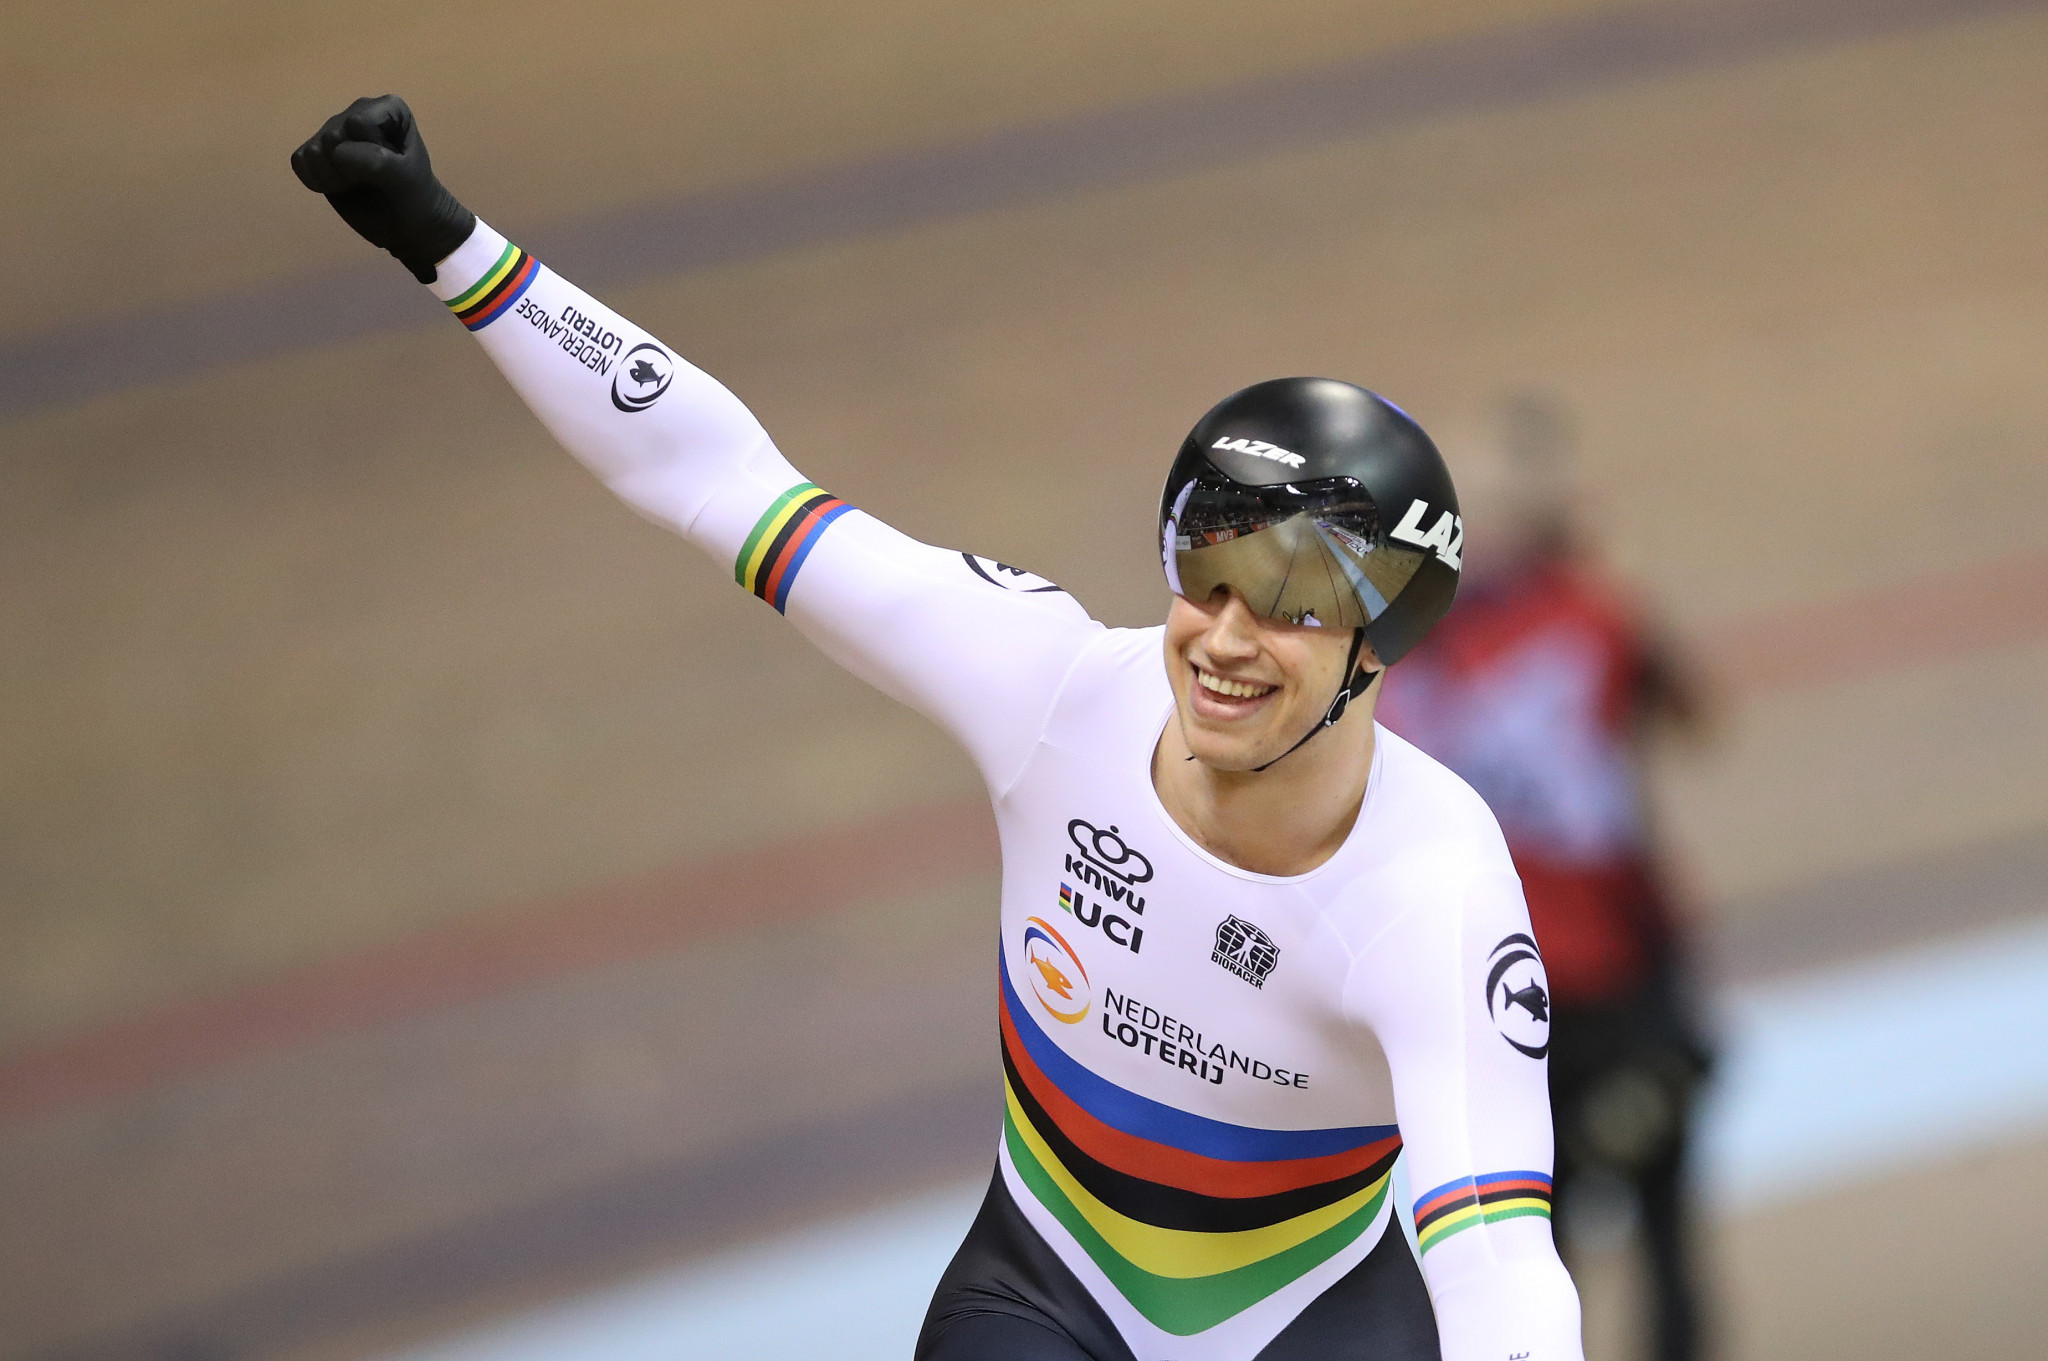 Lavreysen wins repeat of World Championship sprint final at UCI Track World Cup in Hong Kong